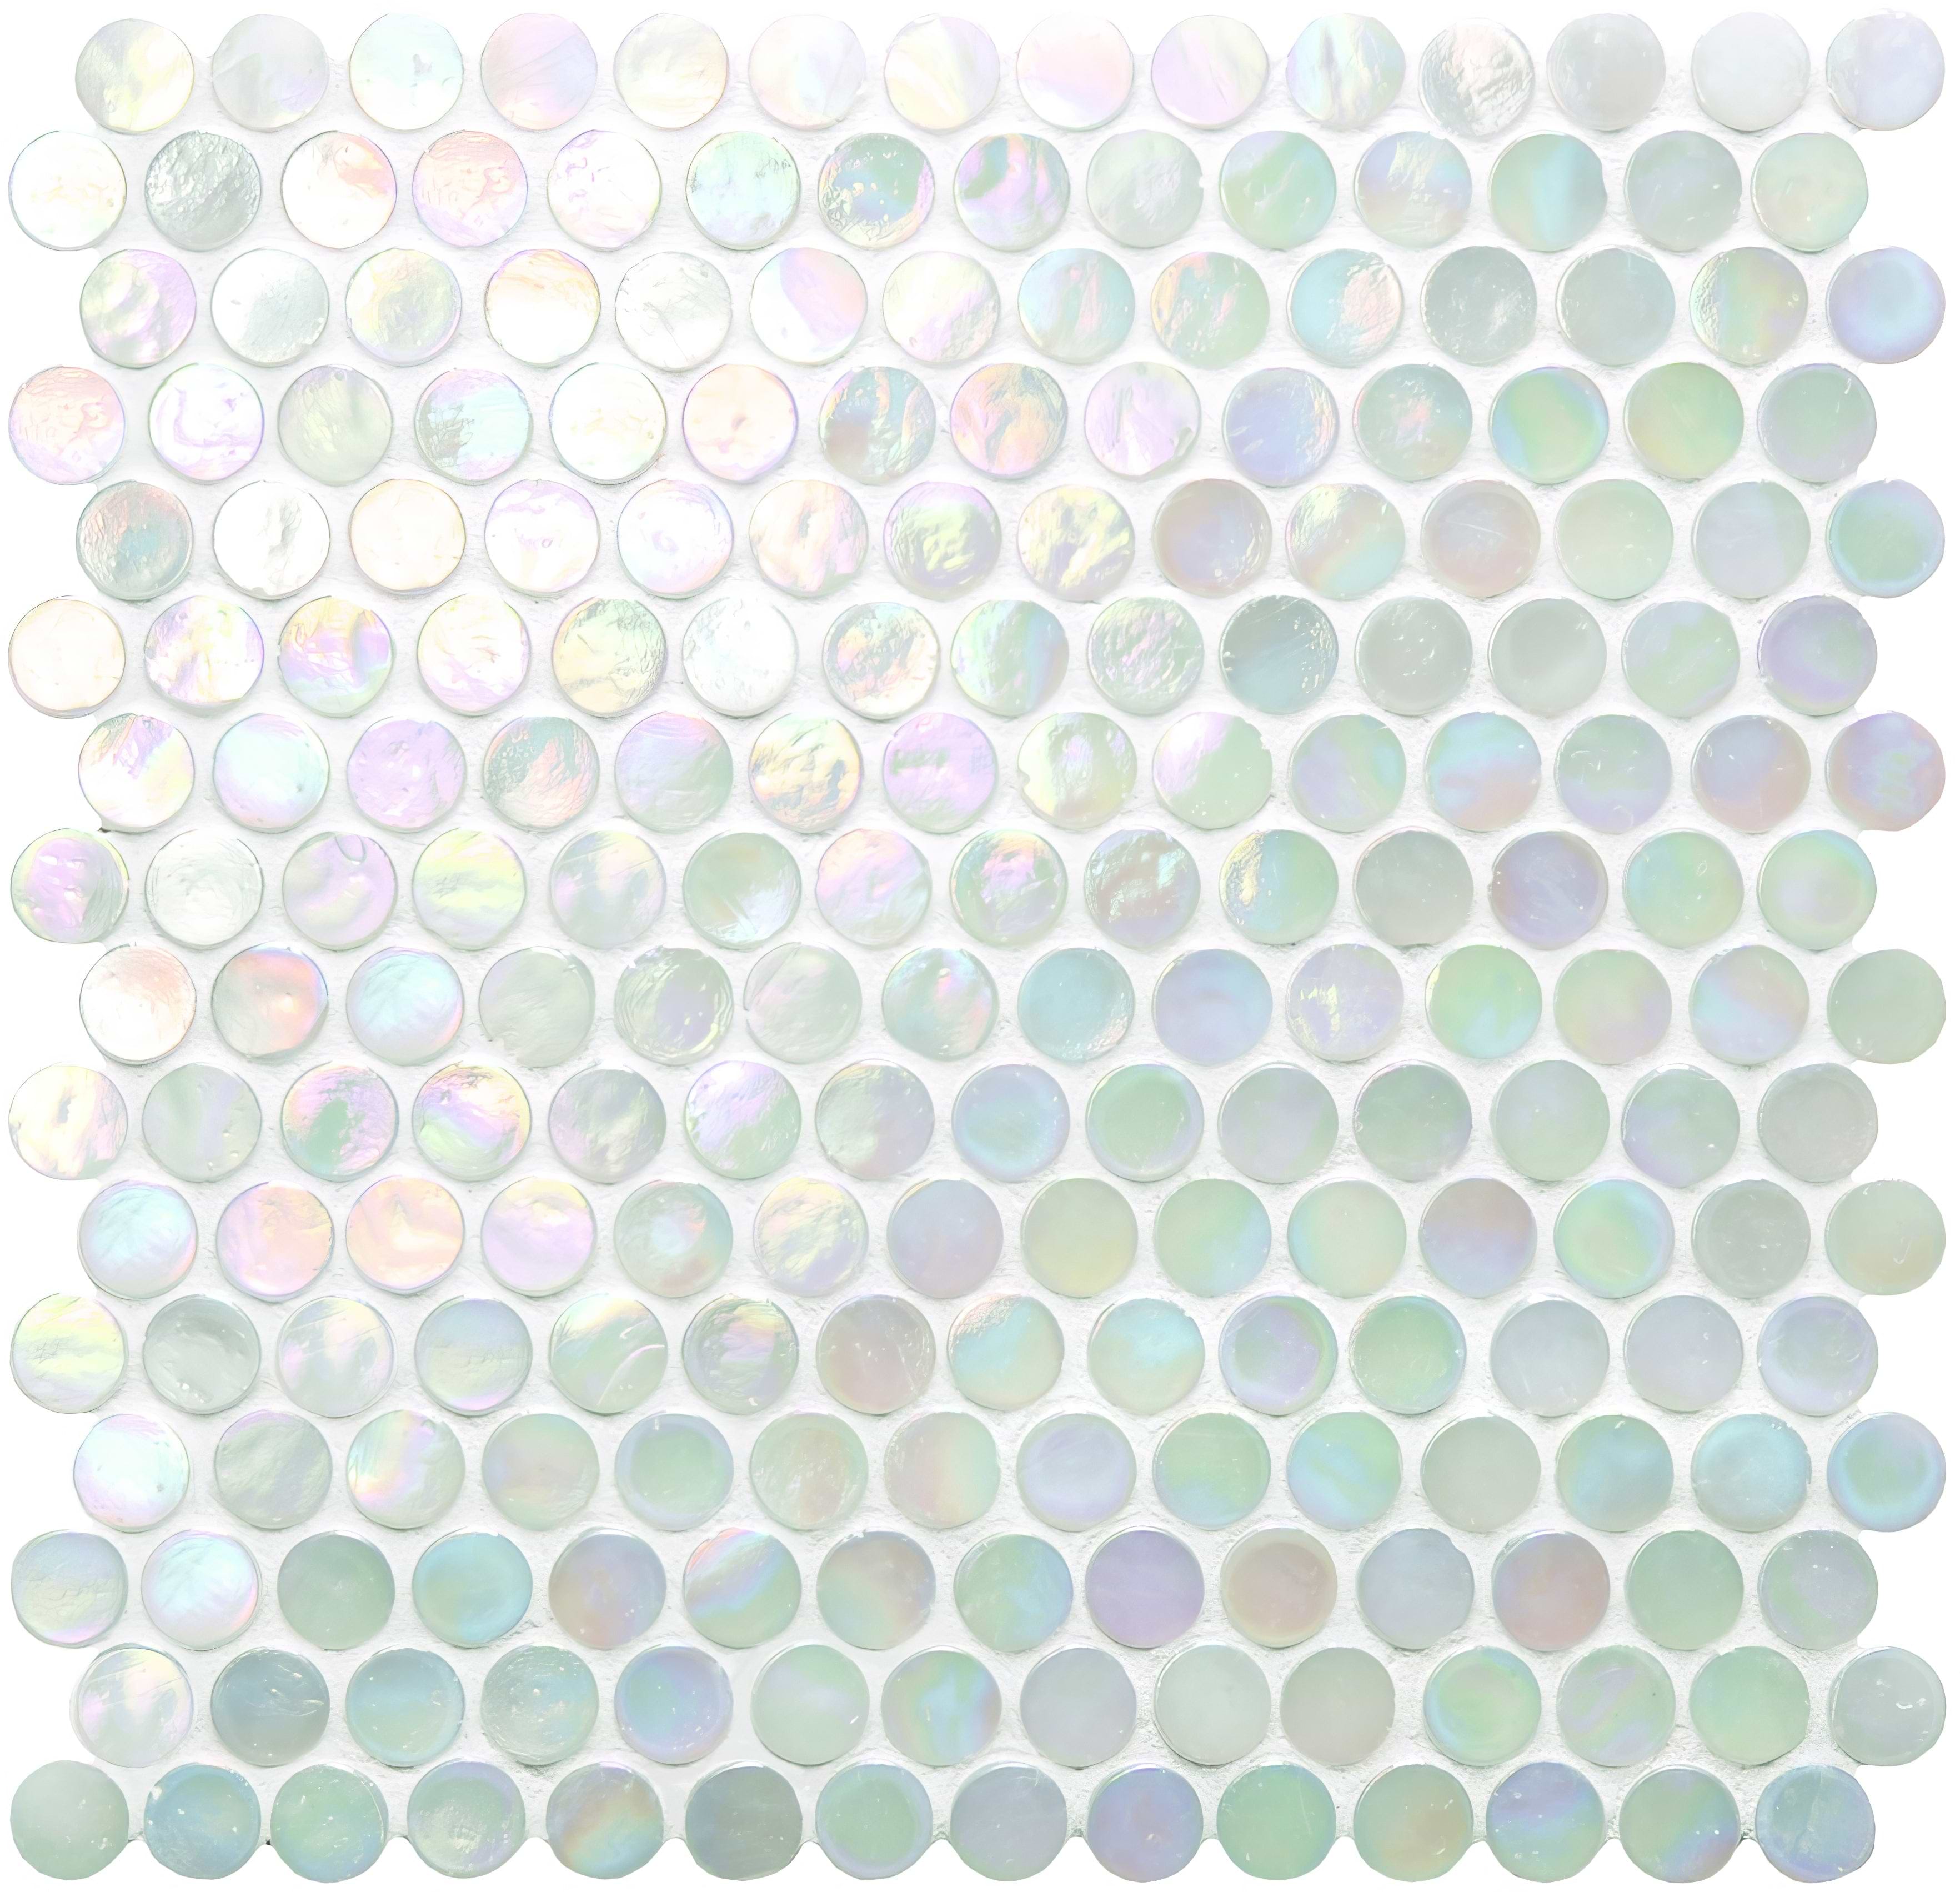 White Lady Iridescent Round Glass Mosaic - Hyperion Tiles